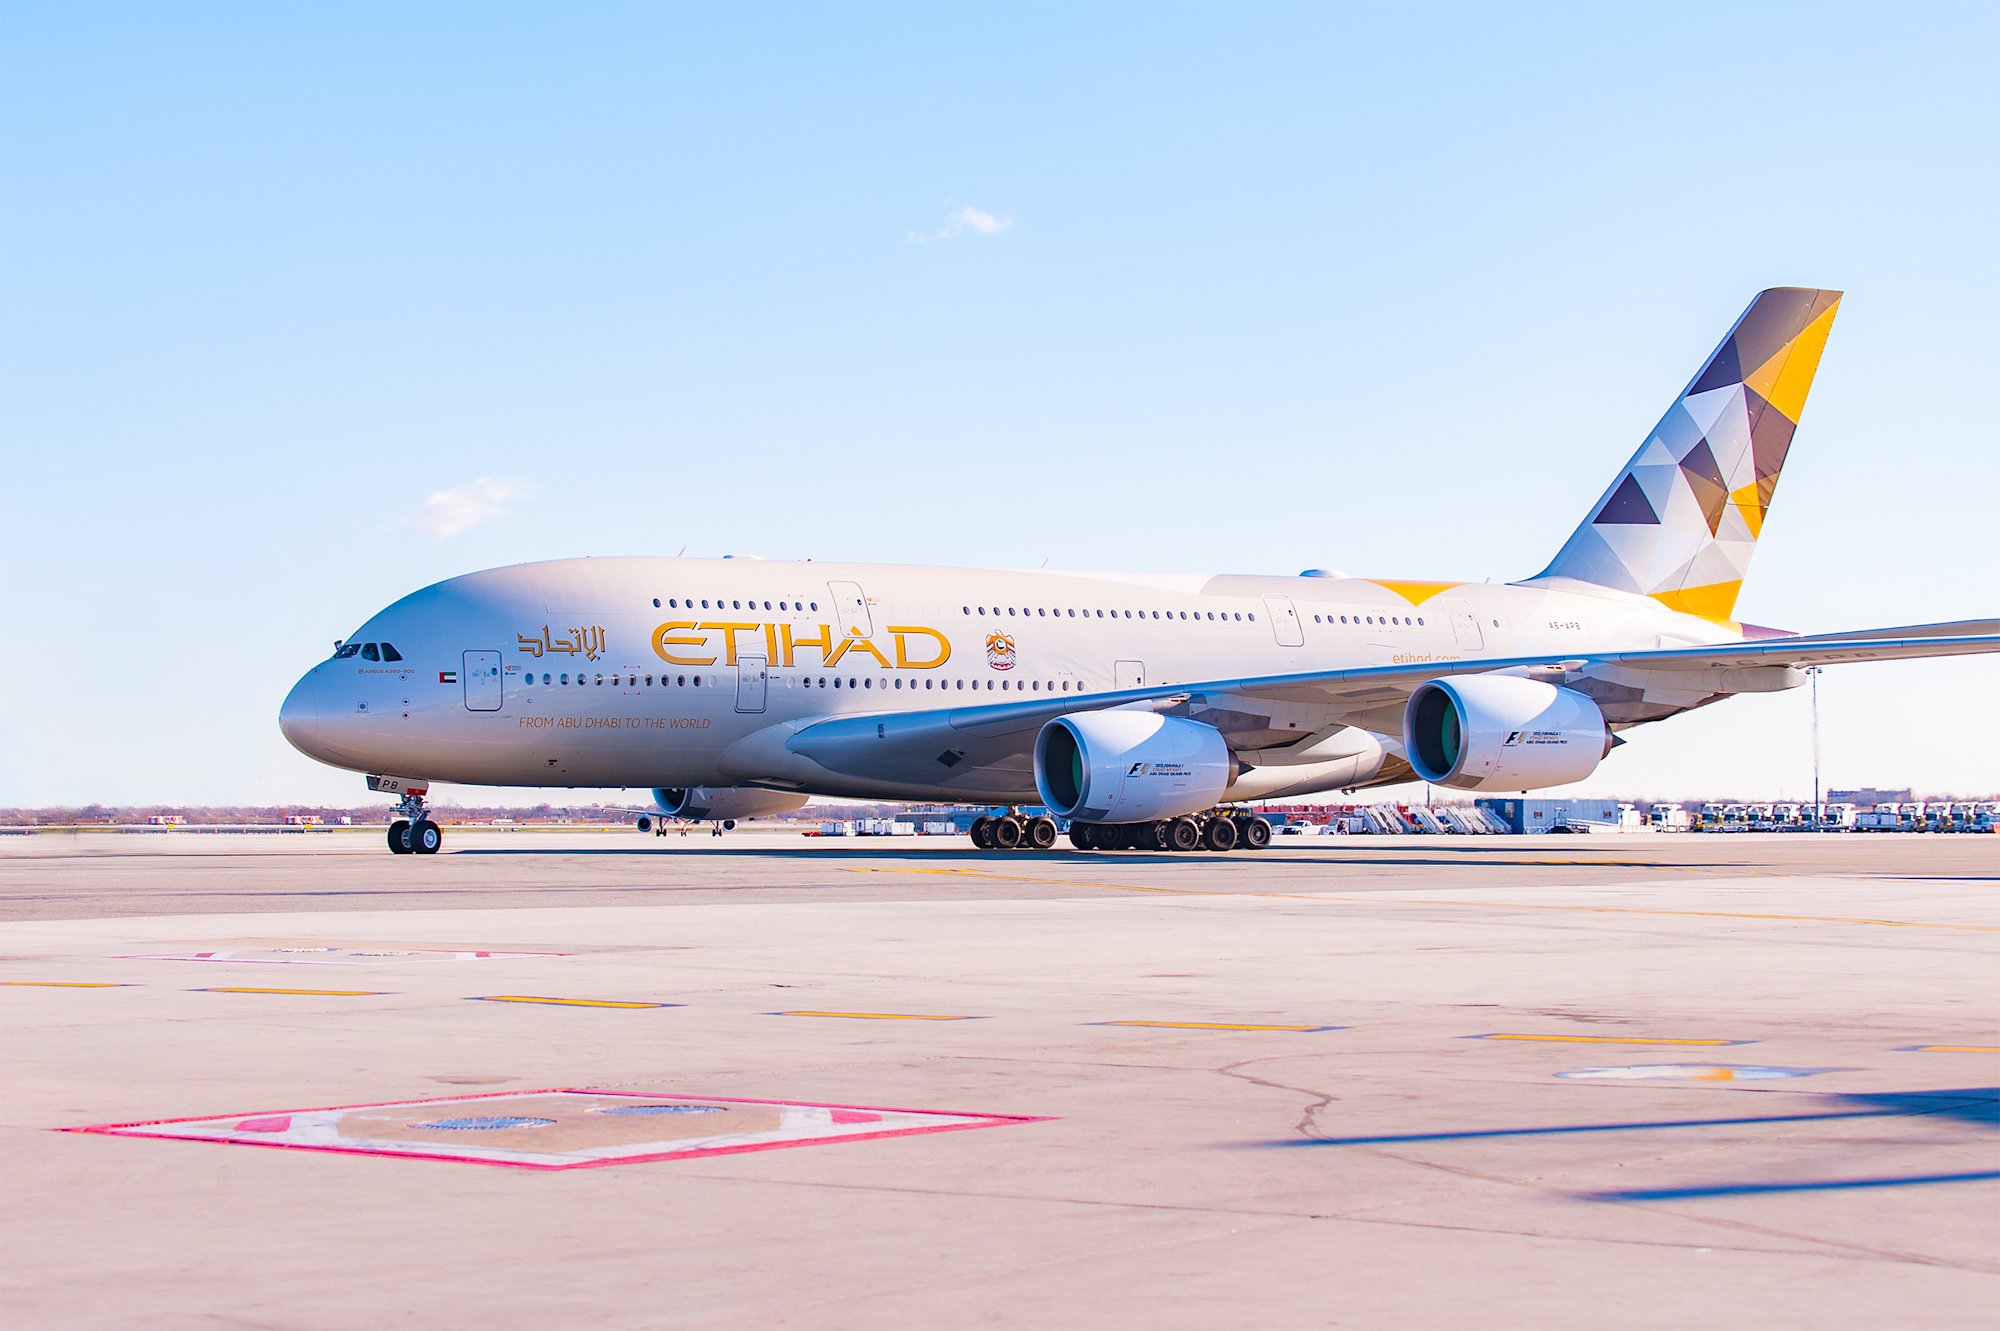 Rumour: Emirates and Etihad Airways in Talks Over a Possible Merger